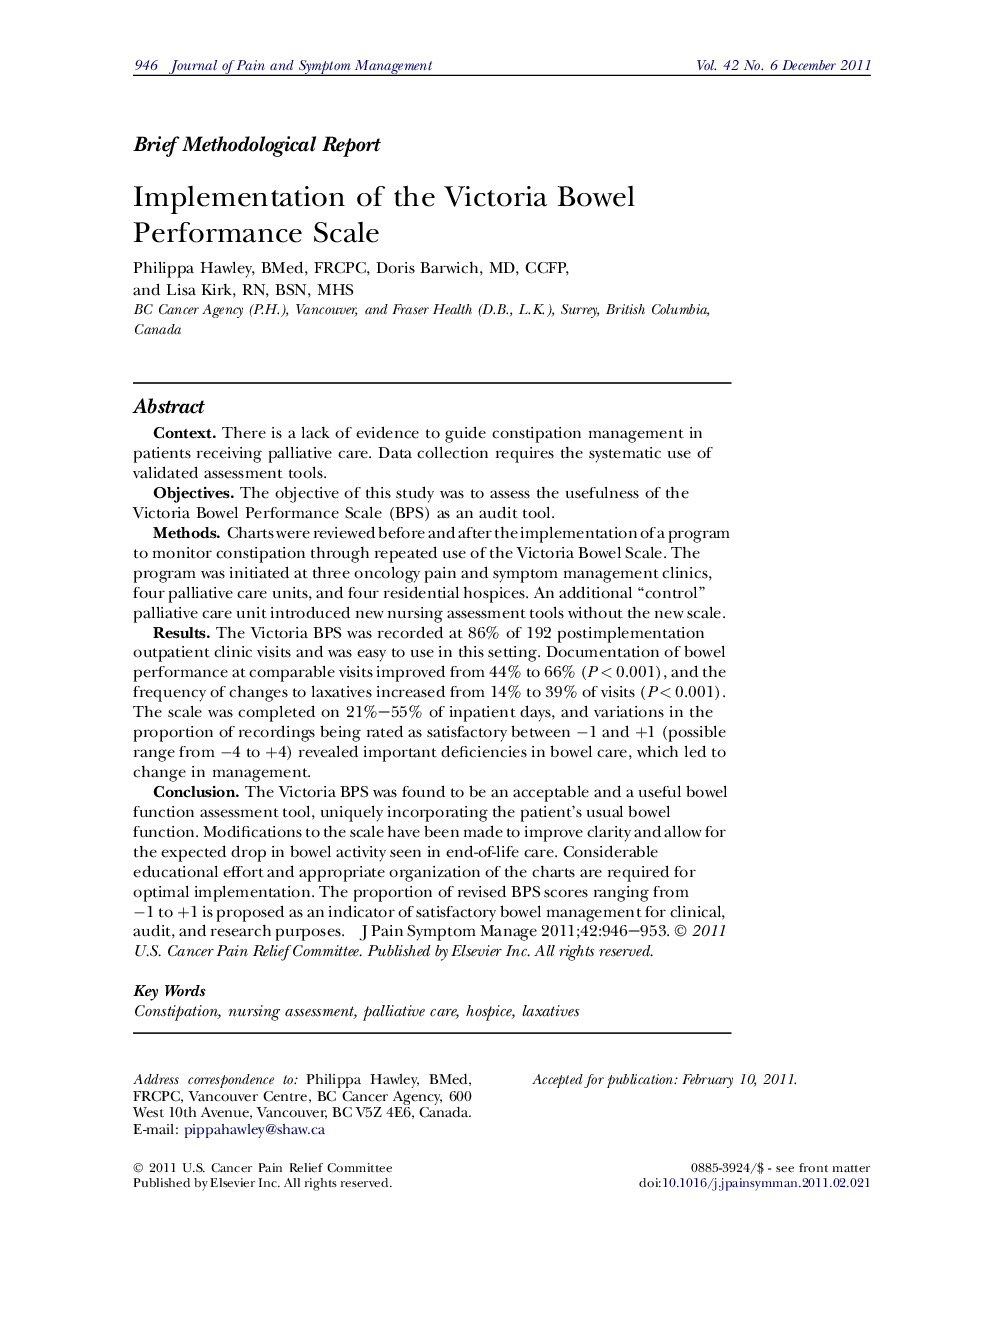 Implementation of the Victoria Bowel Performance Scale